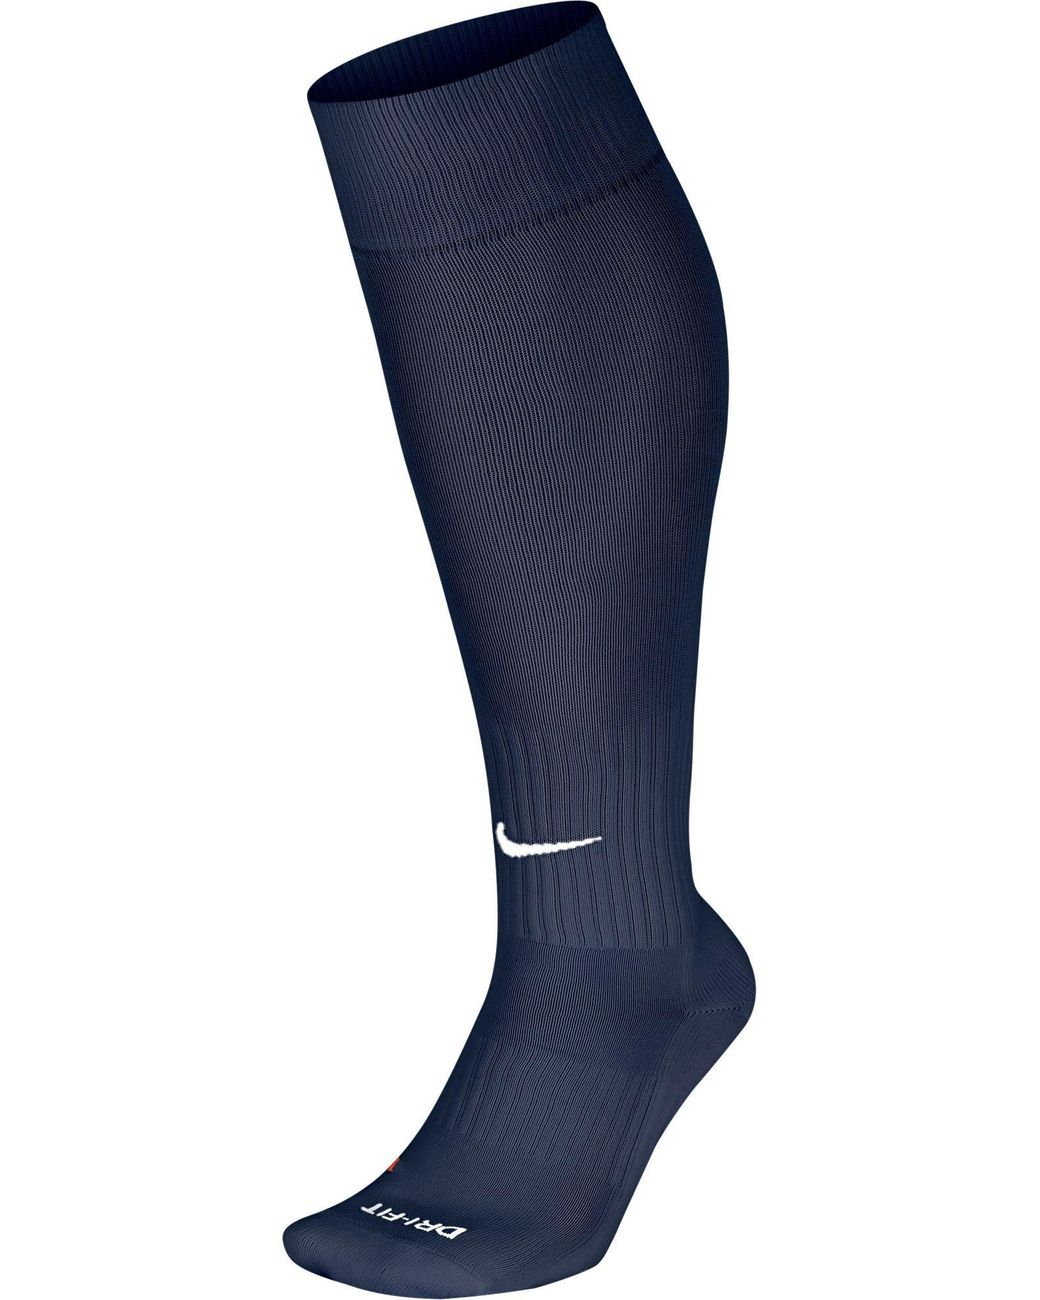 Nike Synthetic Classic Soccer Socks in Midnight Navy (Blue) - Lyst